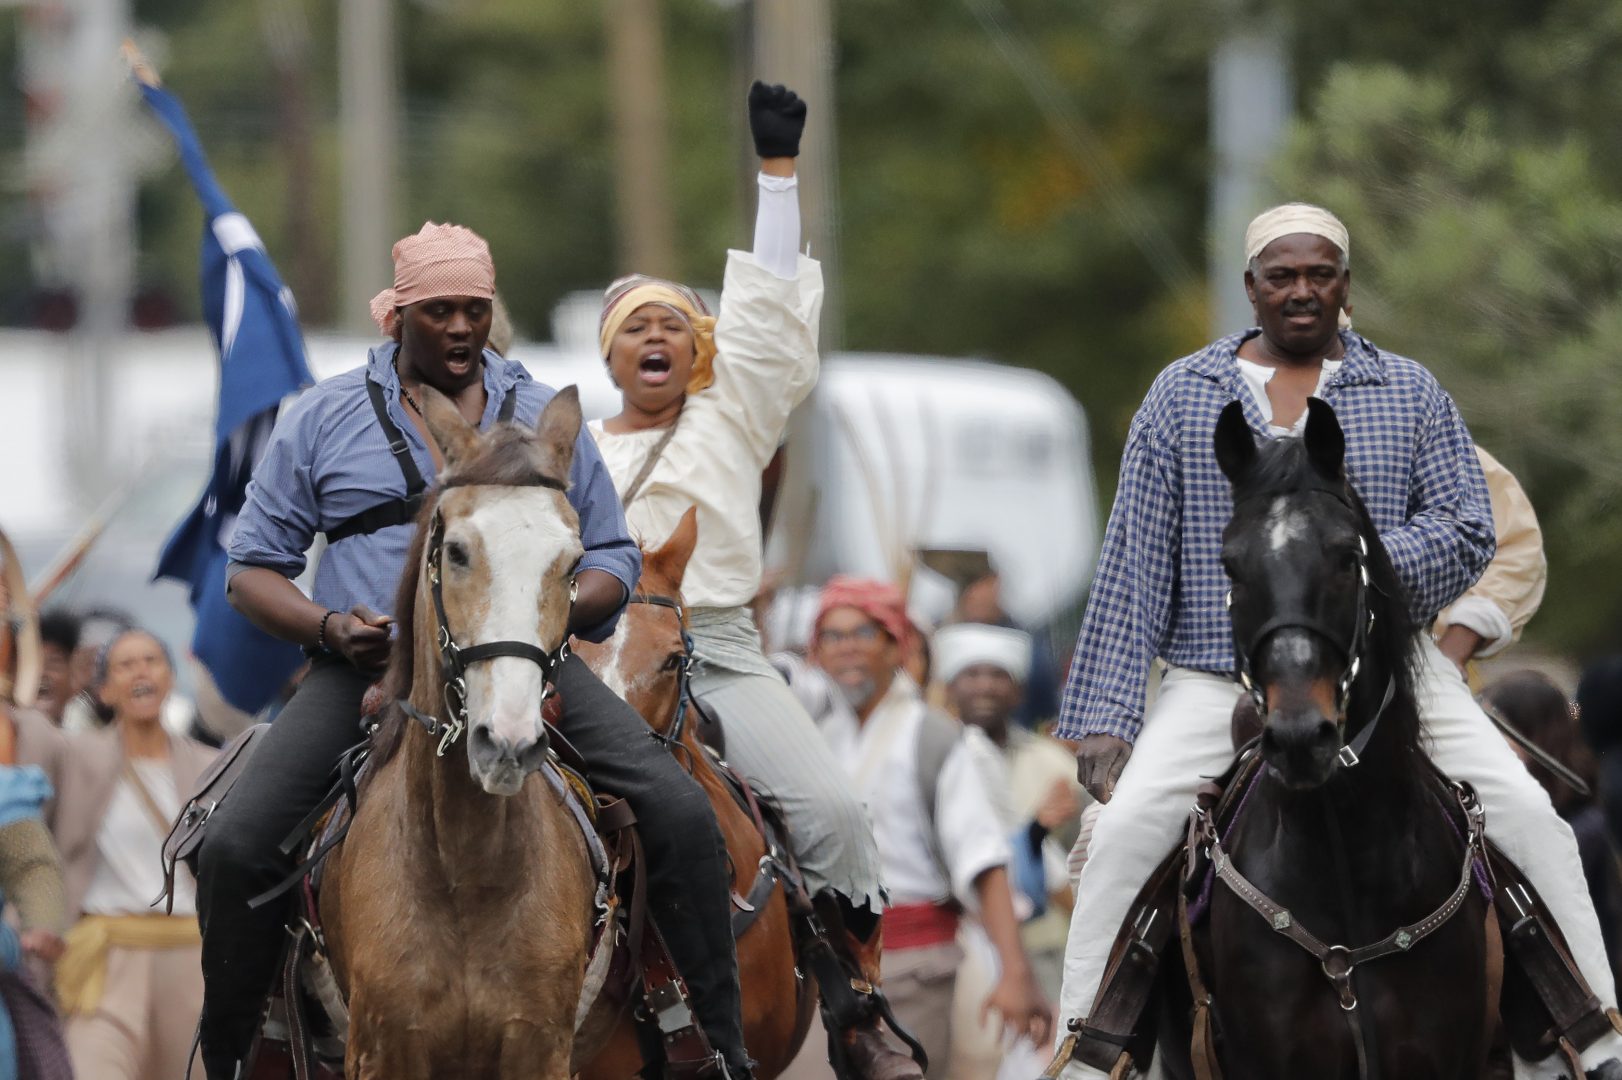 Volunteers participate in a reenactment of what is thought to be the largest slave rebellion in U.S. history in LaPlace, La., on Friday.